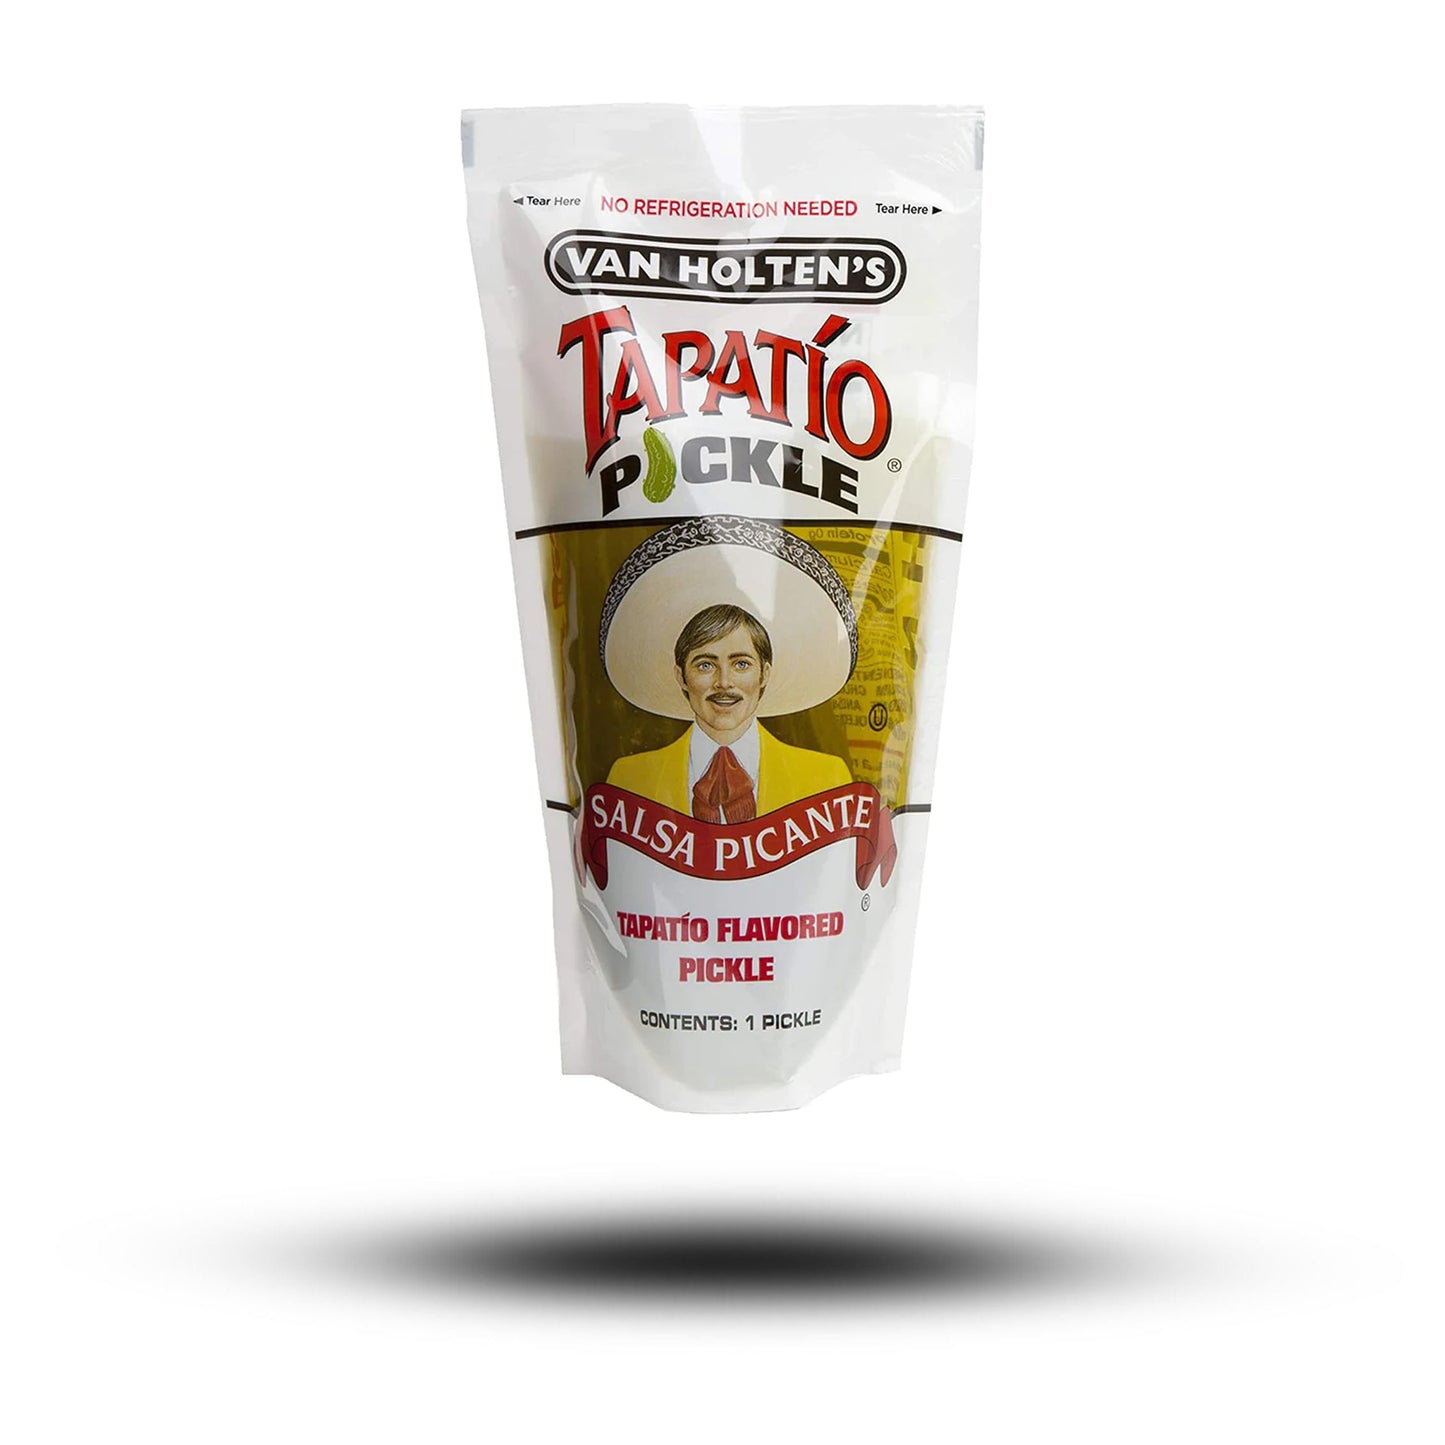 Van Holtens Pickle Tapatio Pickle Jumbo 140g